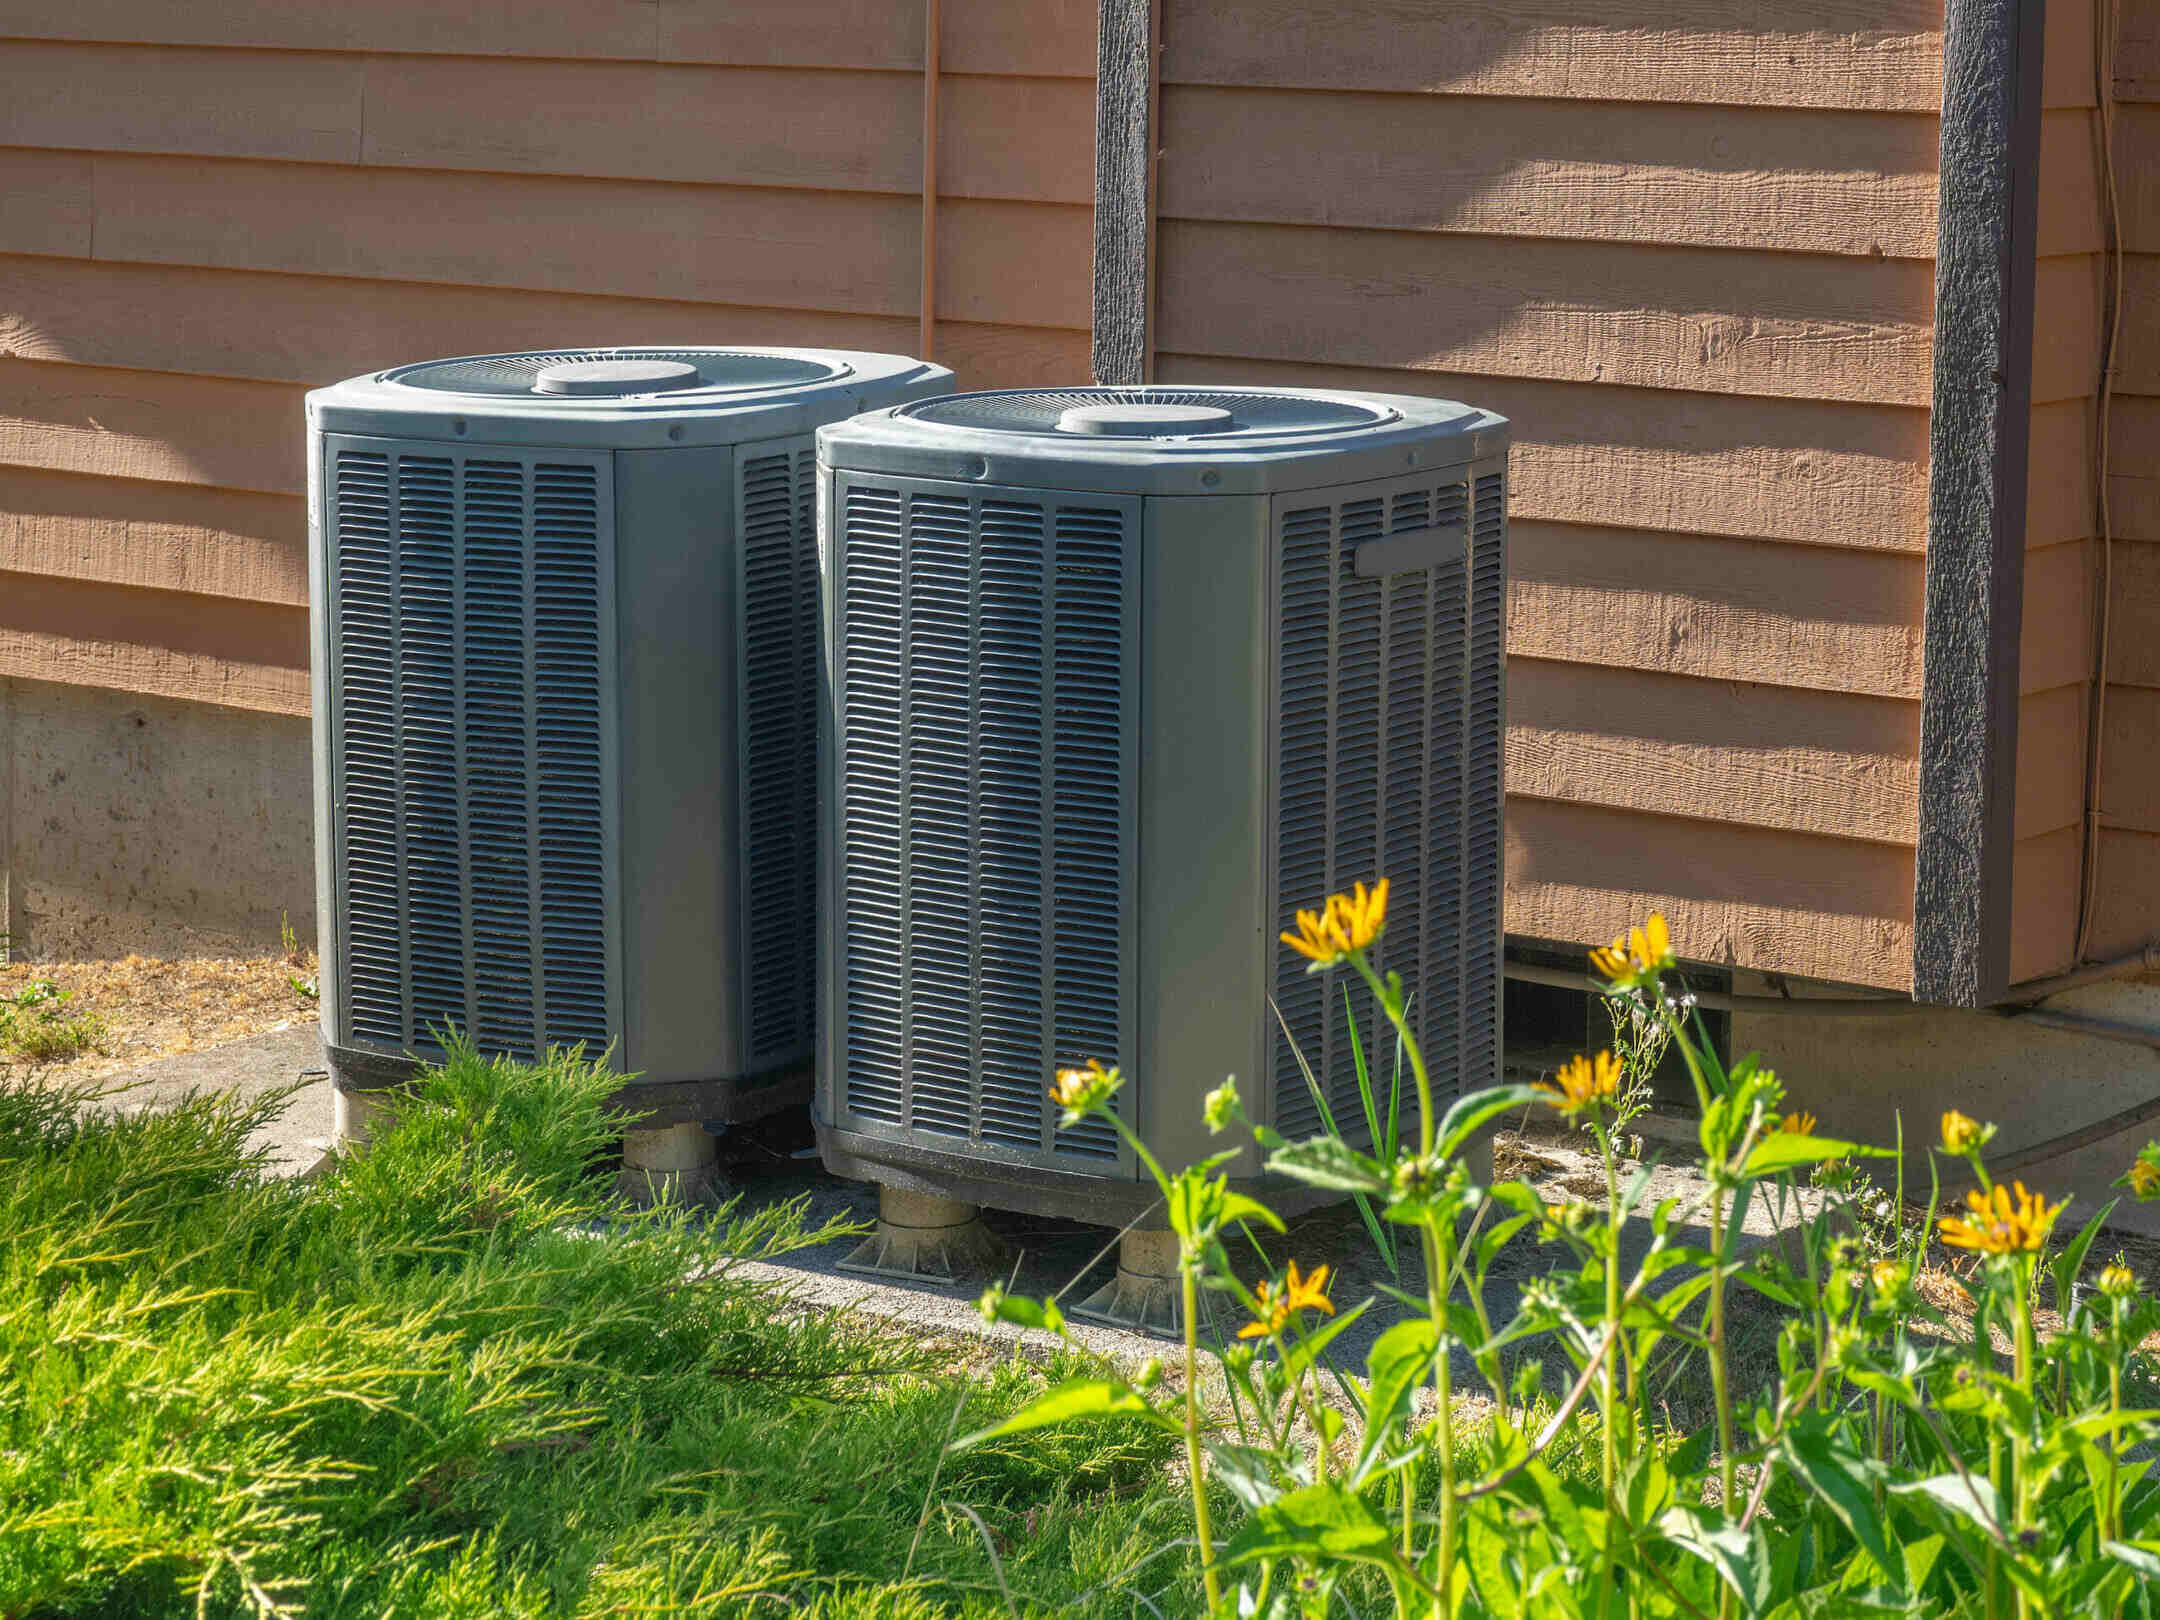 What Is An Outdoor AC Unit Called?